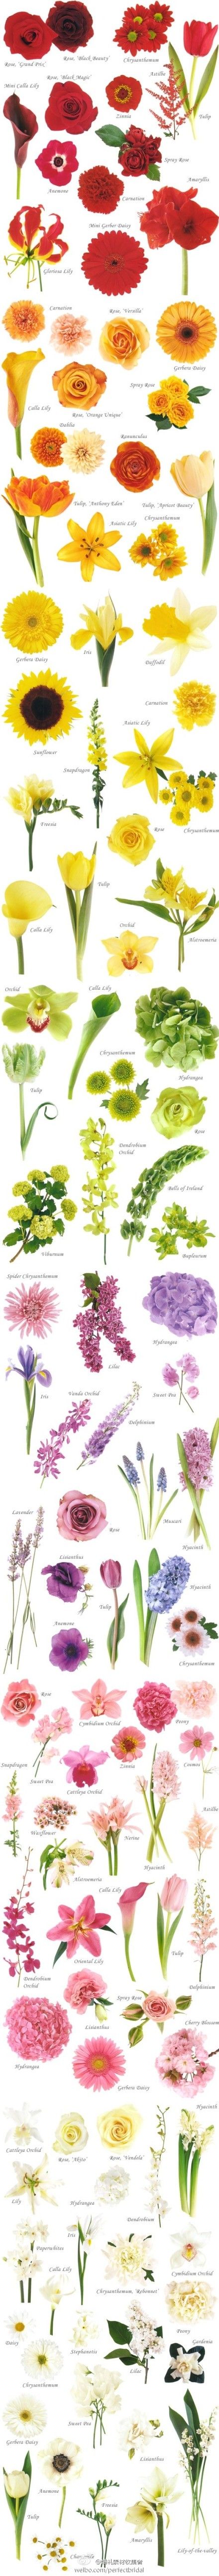 flower chart- I'll be happy I pinned this someday!